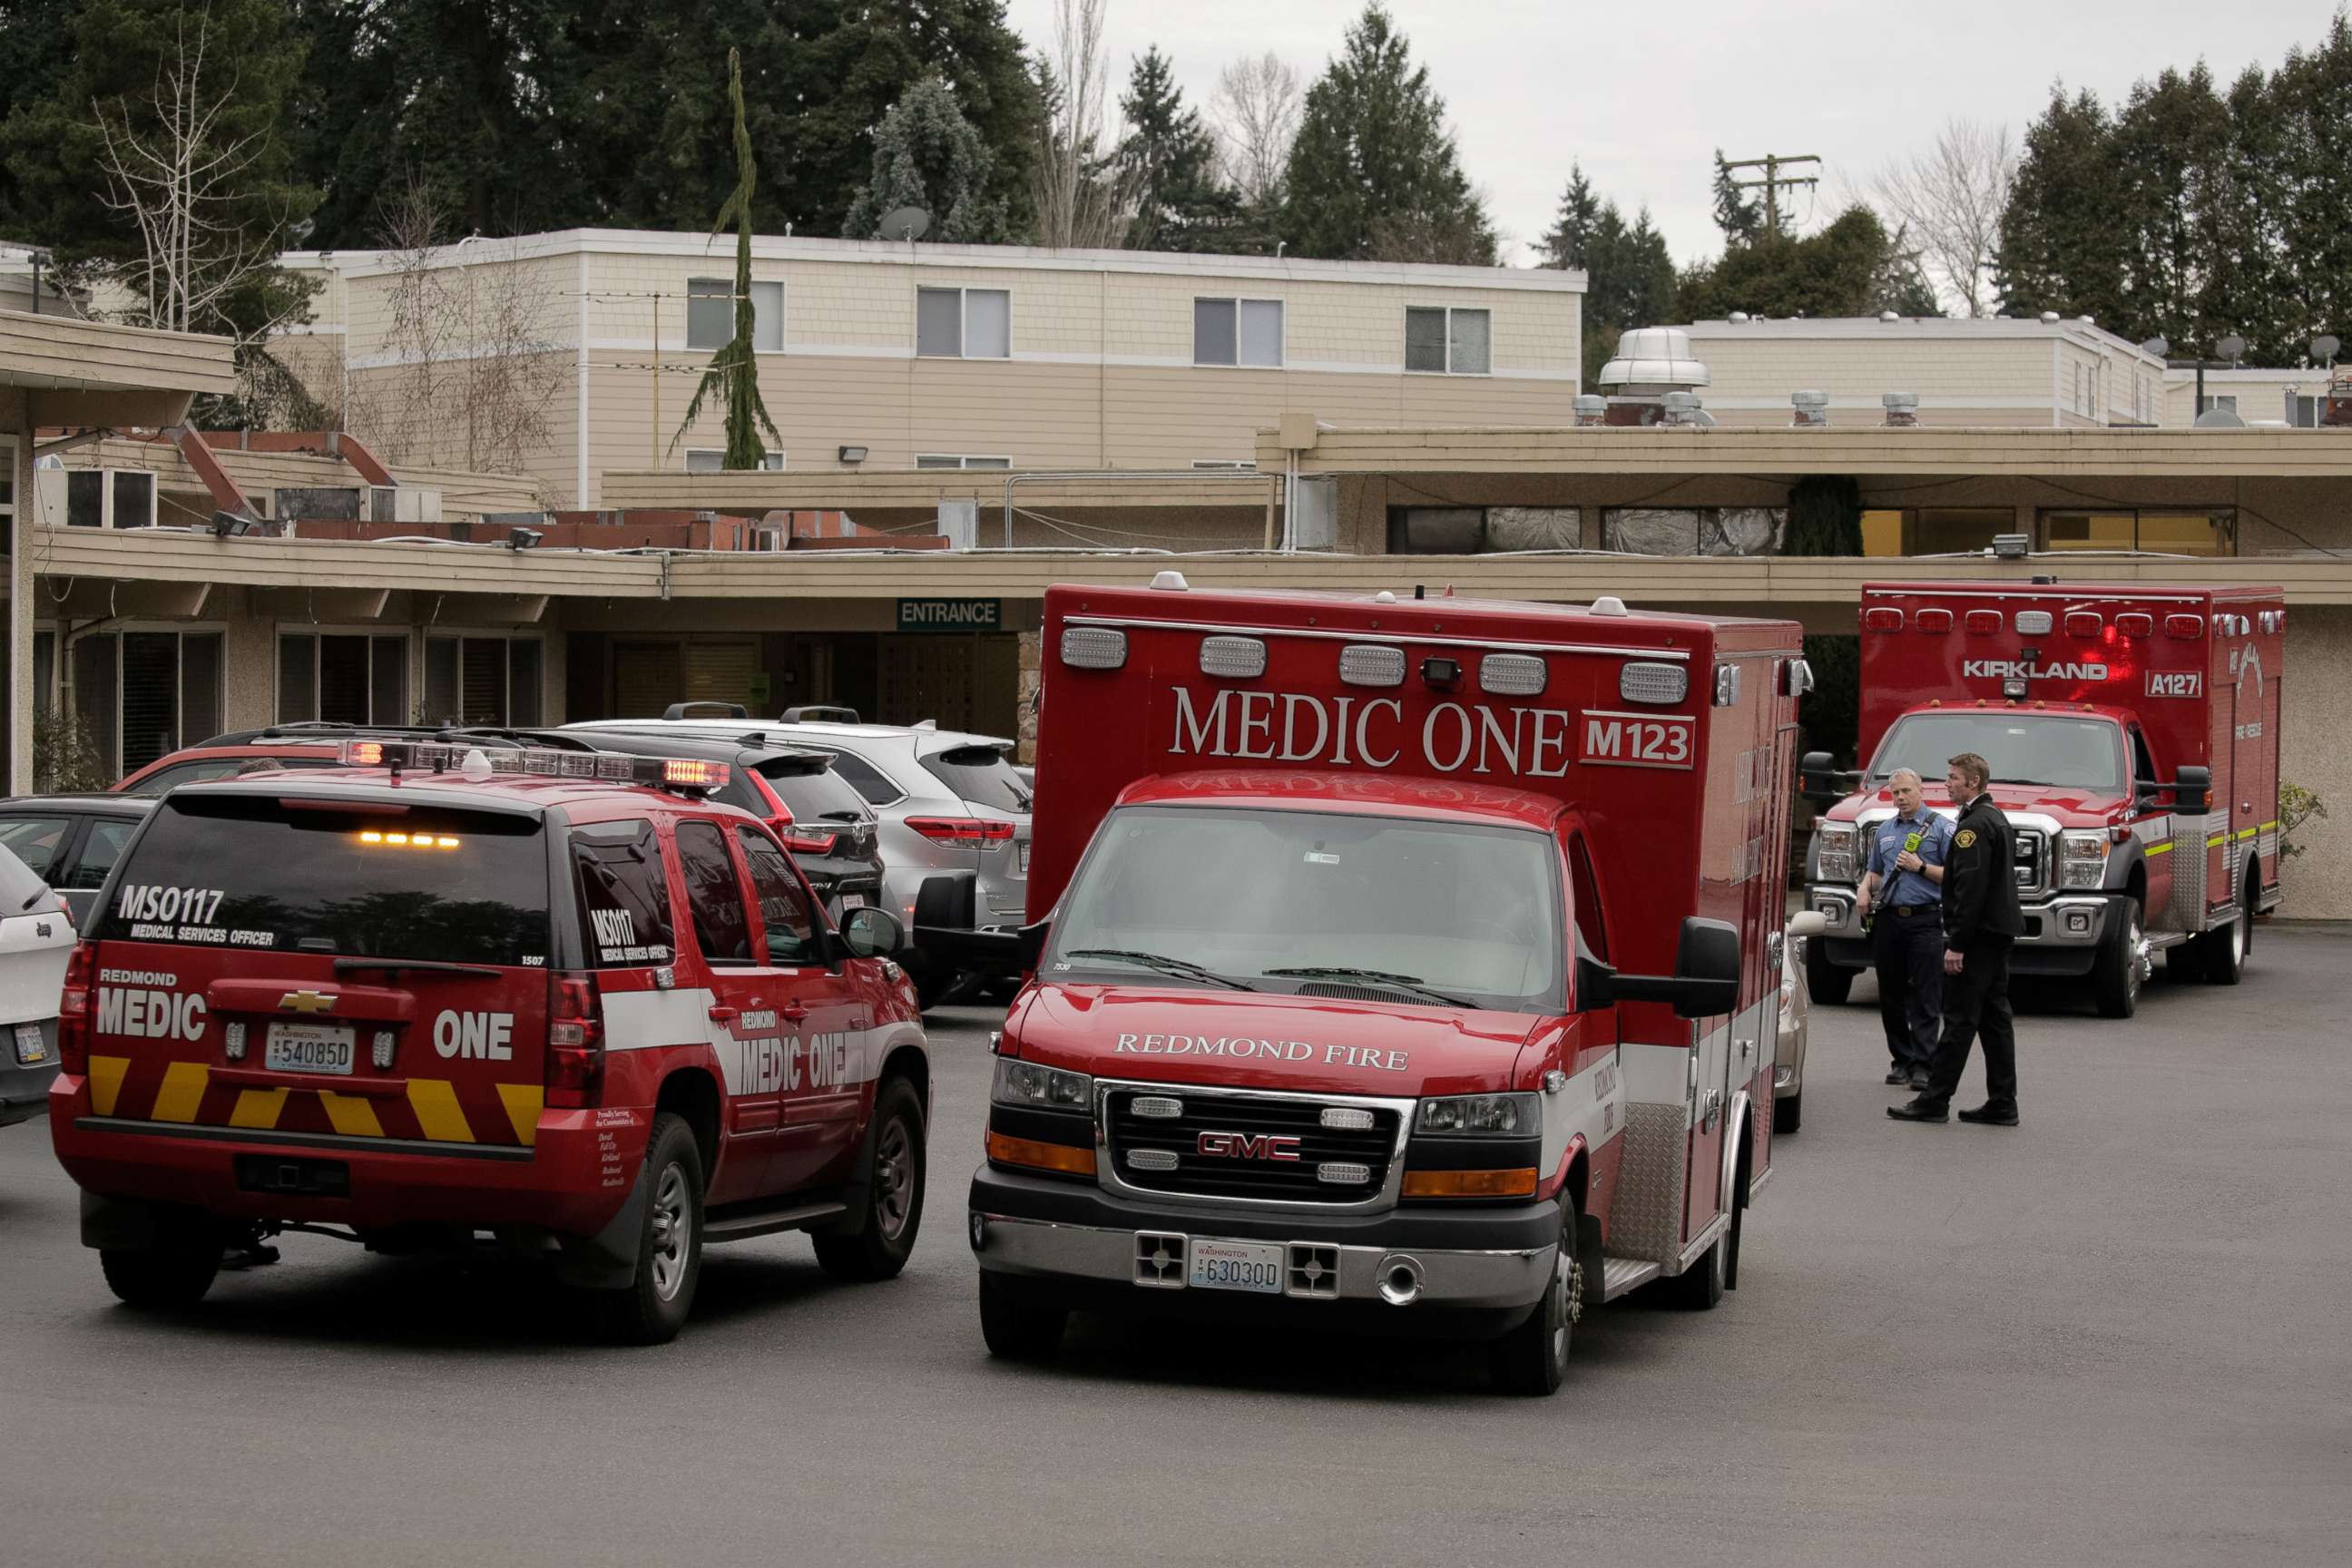 PHOTO: An ambulance transports a patient from the Life Care Center of Kirkland, the long-term care facility linked to several confirmed cases of the novel coronavirus in the state, in Kirkland, Washington, March 1, 2020.